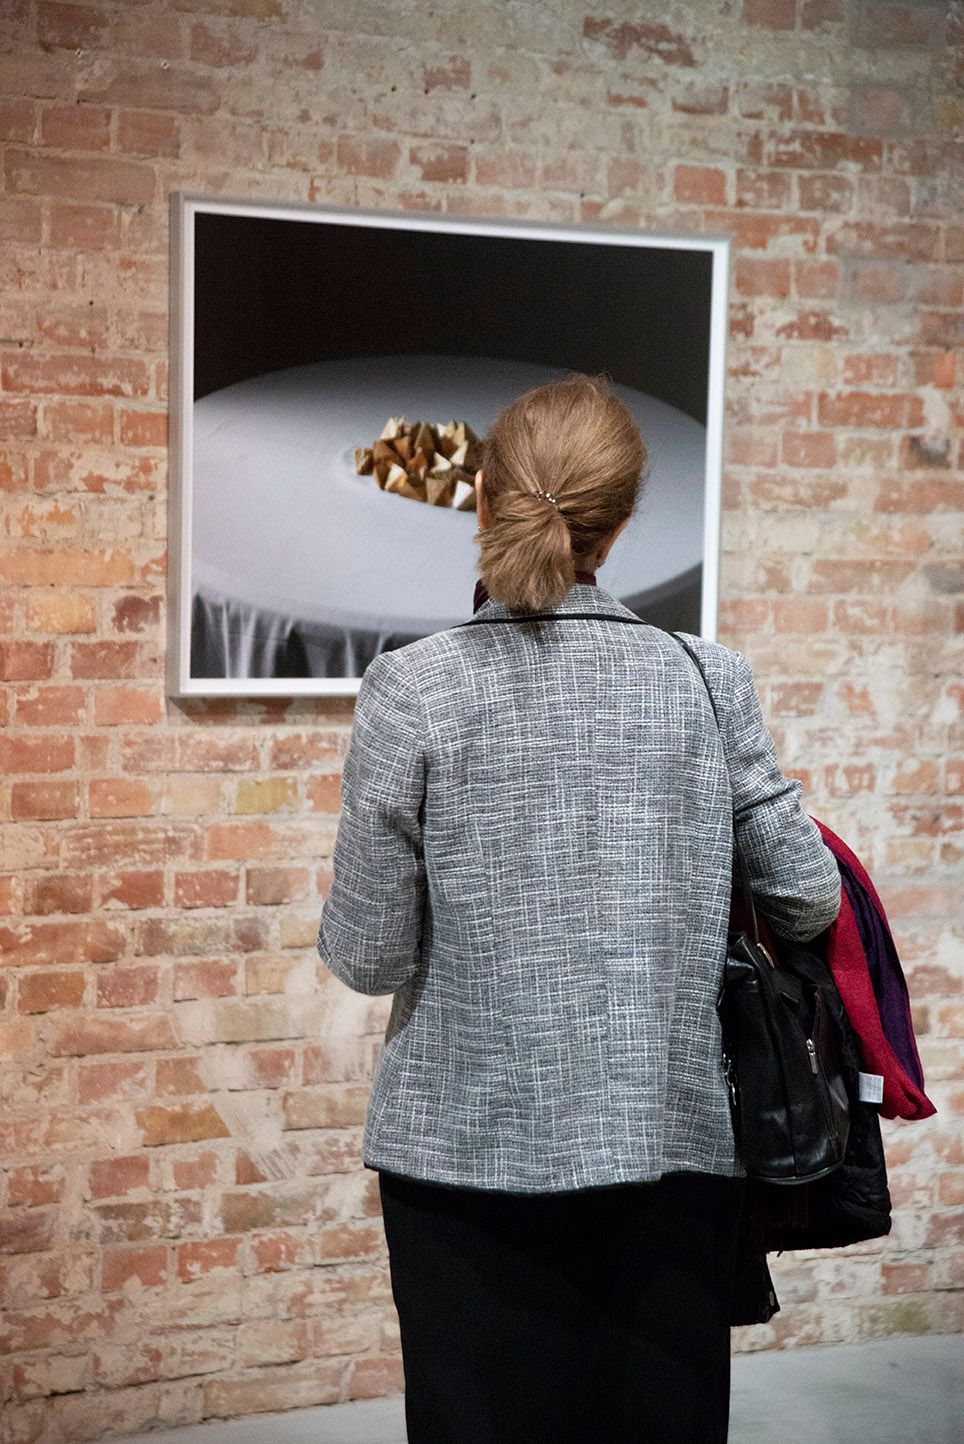 A visitor standing in front of a framed work hanging on a brick wall and looking. The work is a close-up of a pile of triangle-shaped individually wrapped chocolates on a surface. 